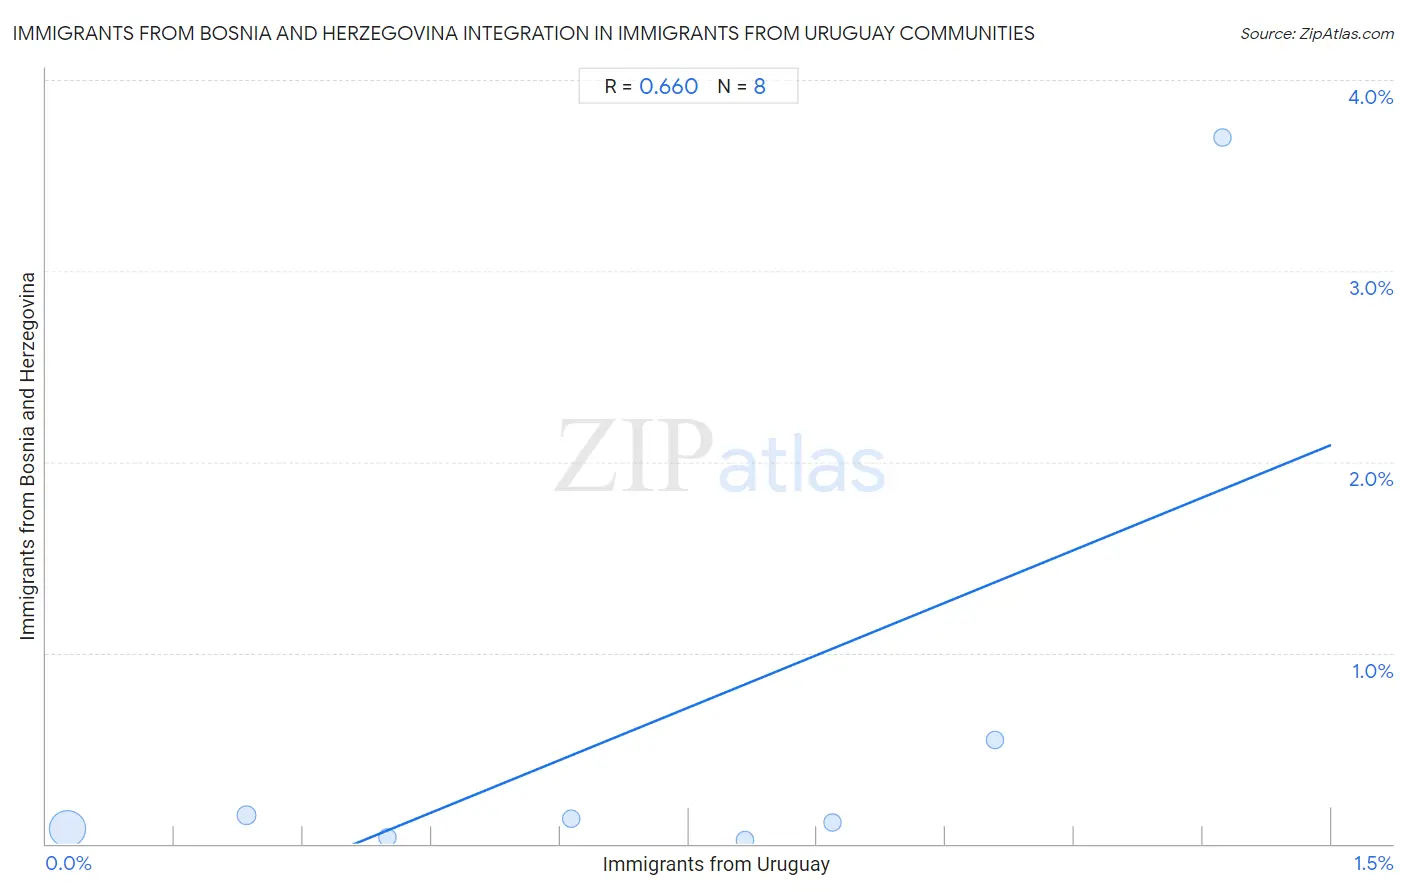 Immigrants from Uruguay Integration in Immigrants from Bosnia and Herzegovina Communities